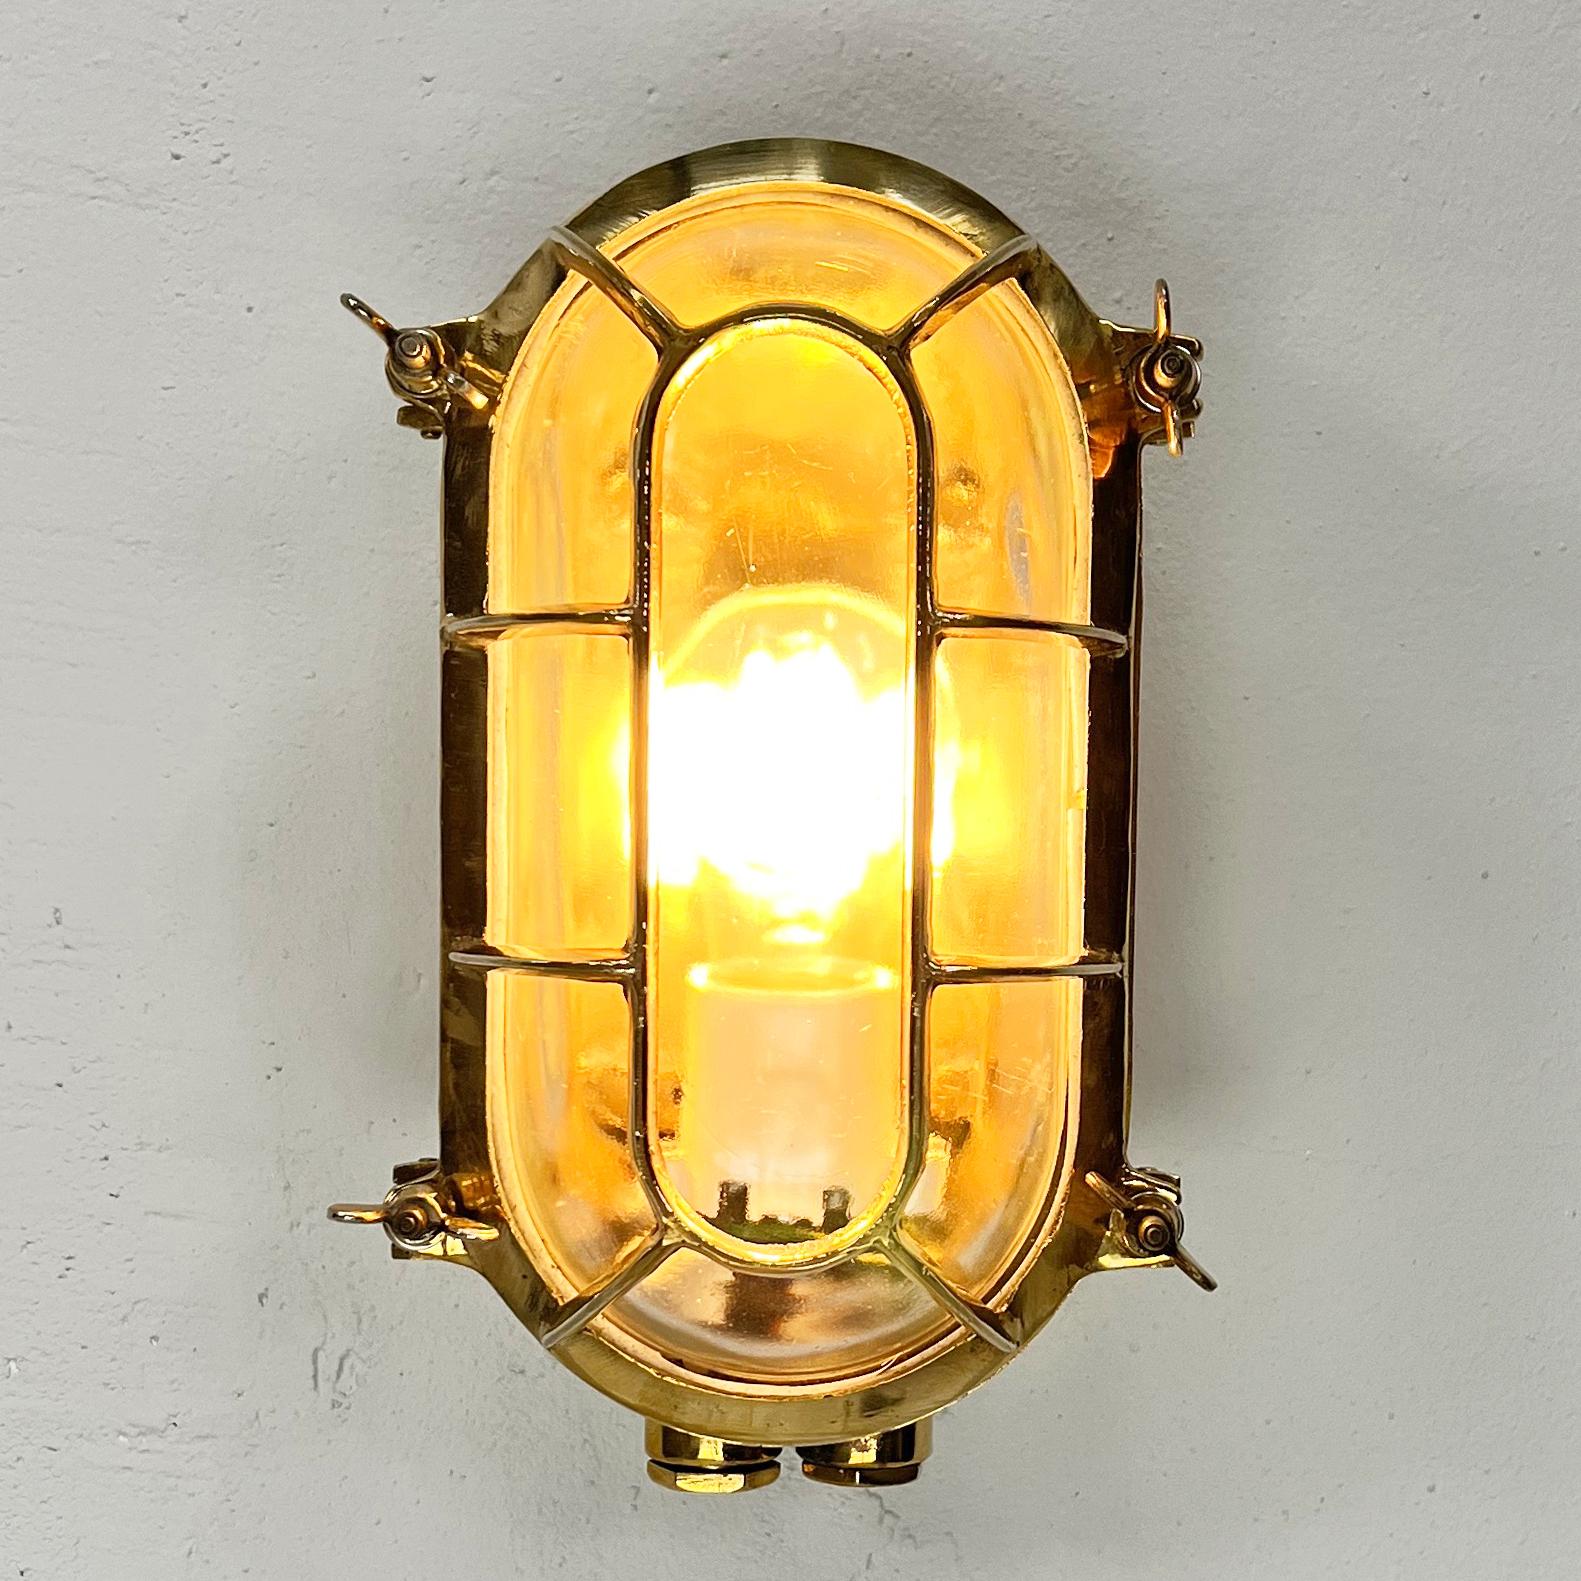 The brass wall sconce is a vintage industrial light fixture built to last a lifetime.  Originally designed for industrial environments, we have salvaged these fixtures from decommissioned cargo ship and professionally restored them. Suitable for